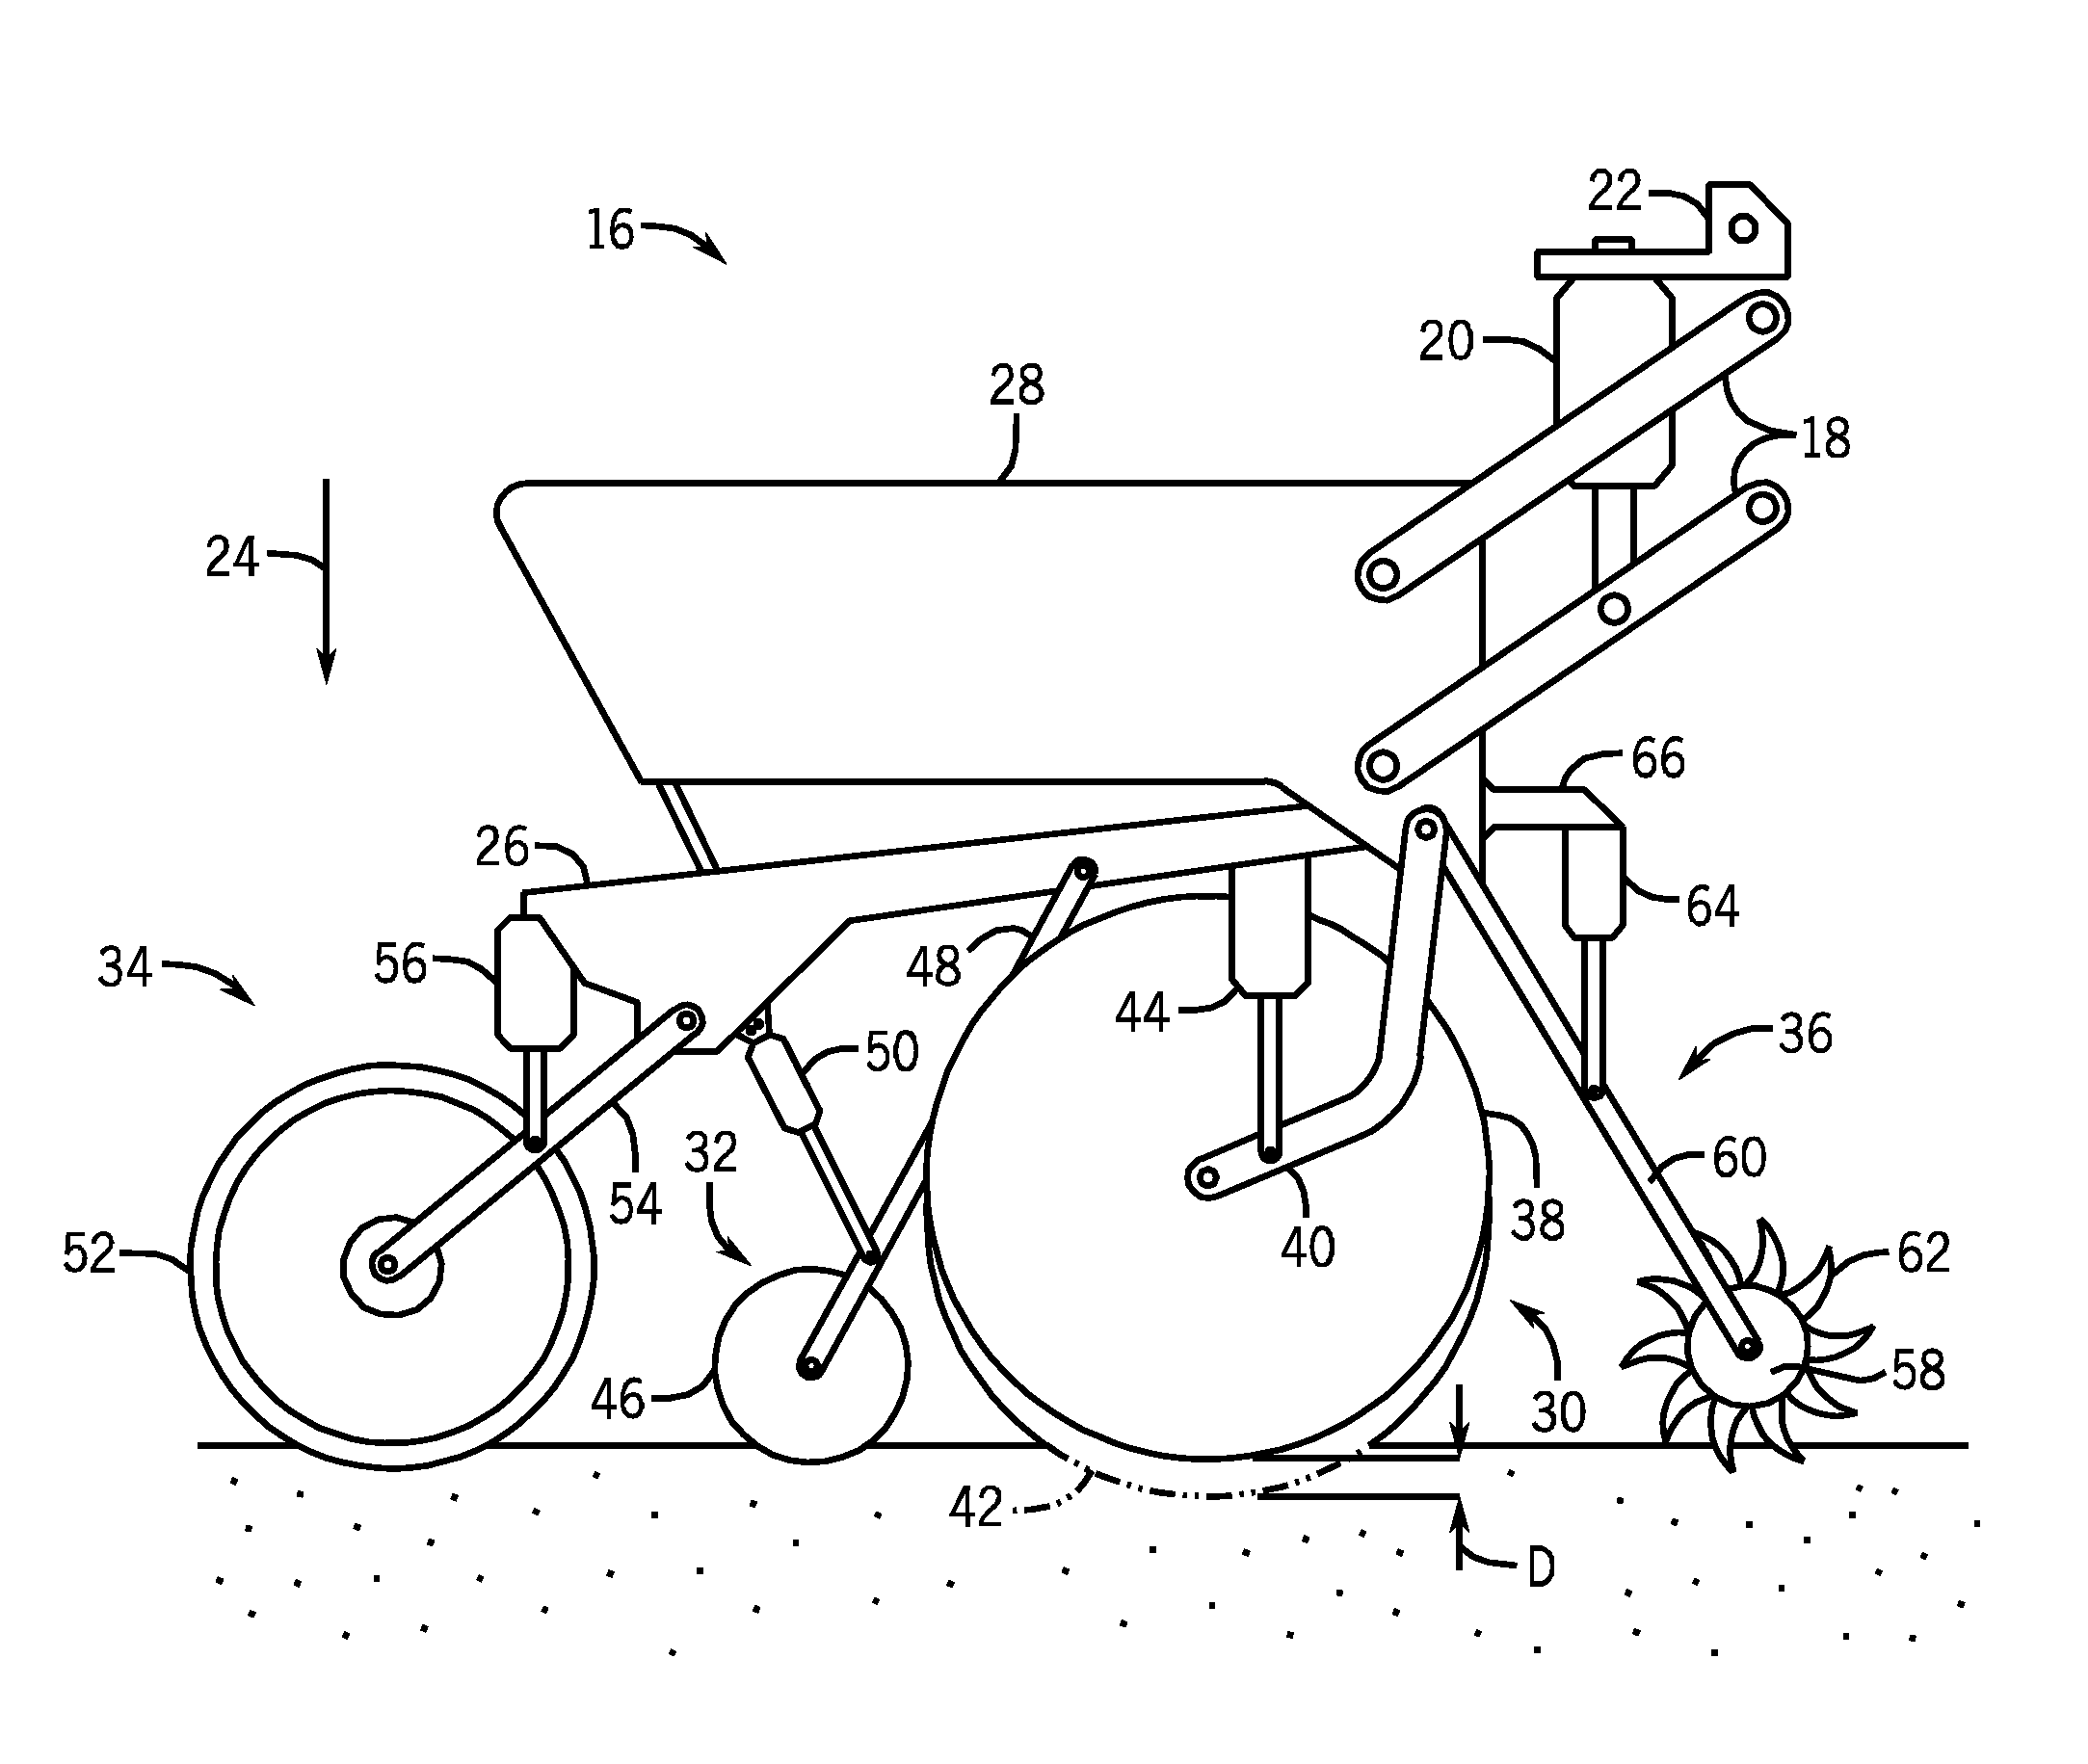 Manual backup system for controlling fluid flow to cylinders within an agricultural implement